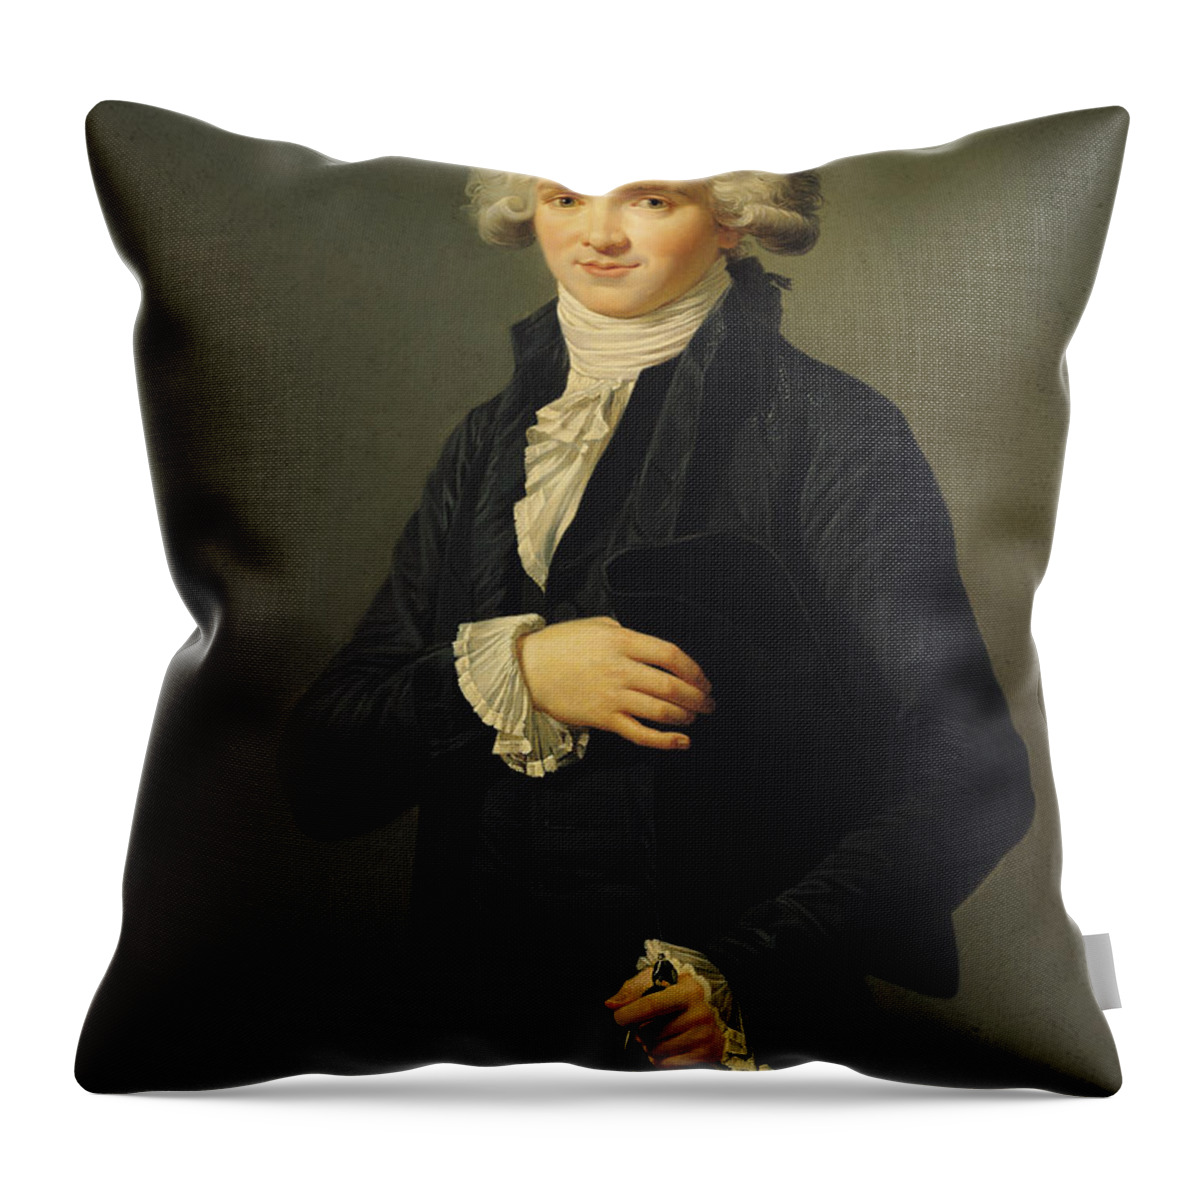 Male Throw Pillow featuring the painting Maximilien de Robespierre by Pierre Roch Vigneron